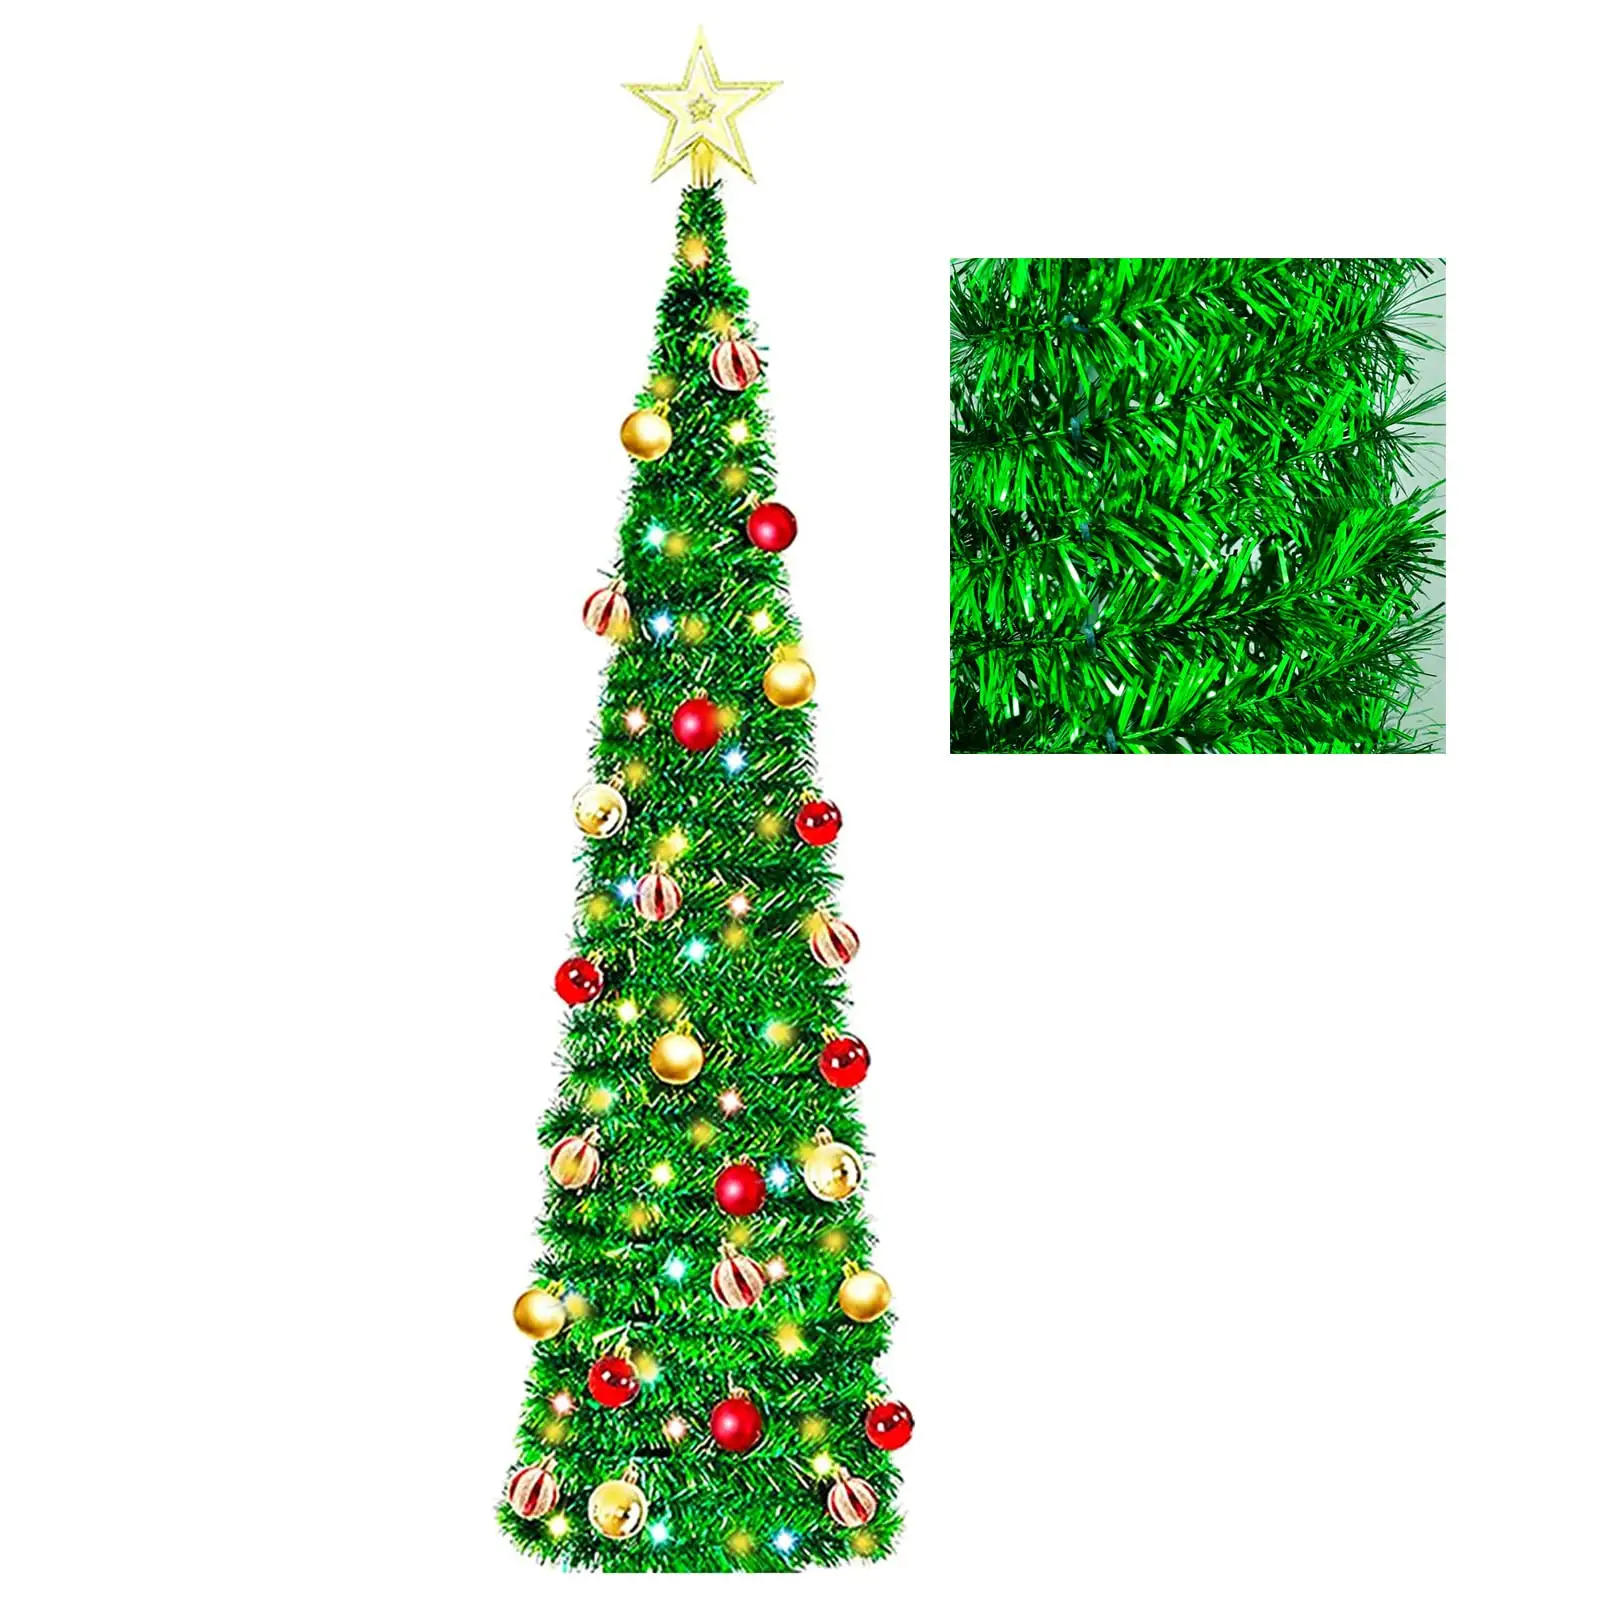 Artificial Christmas Tree , 5-foot pop-up foldable wire Christmas tree with Christmas ball